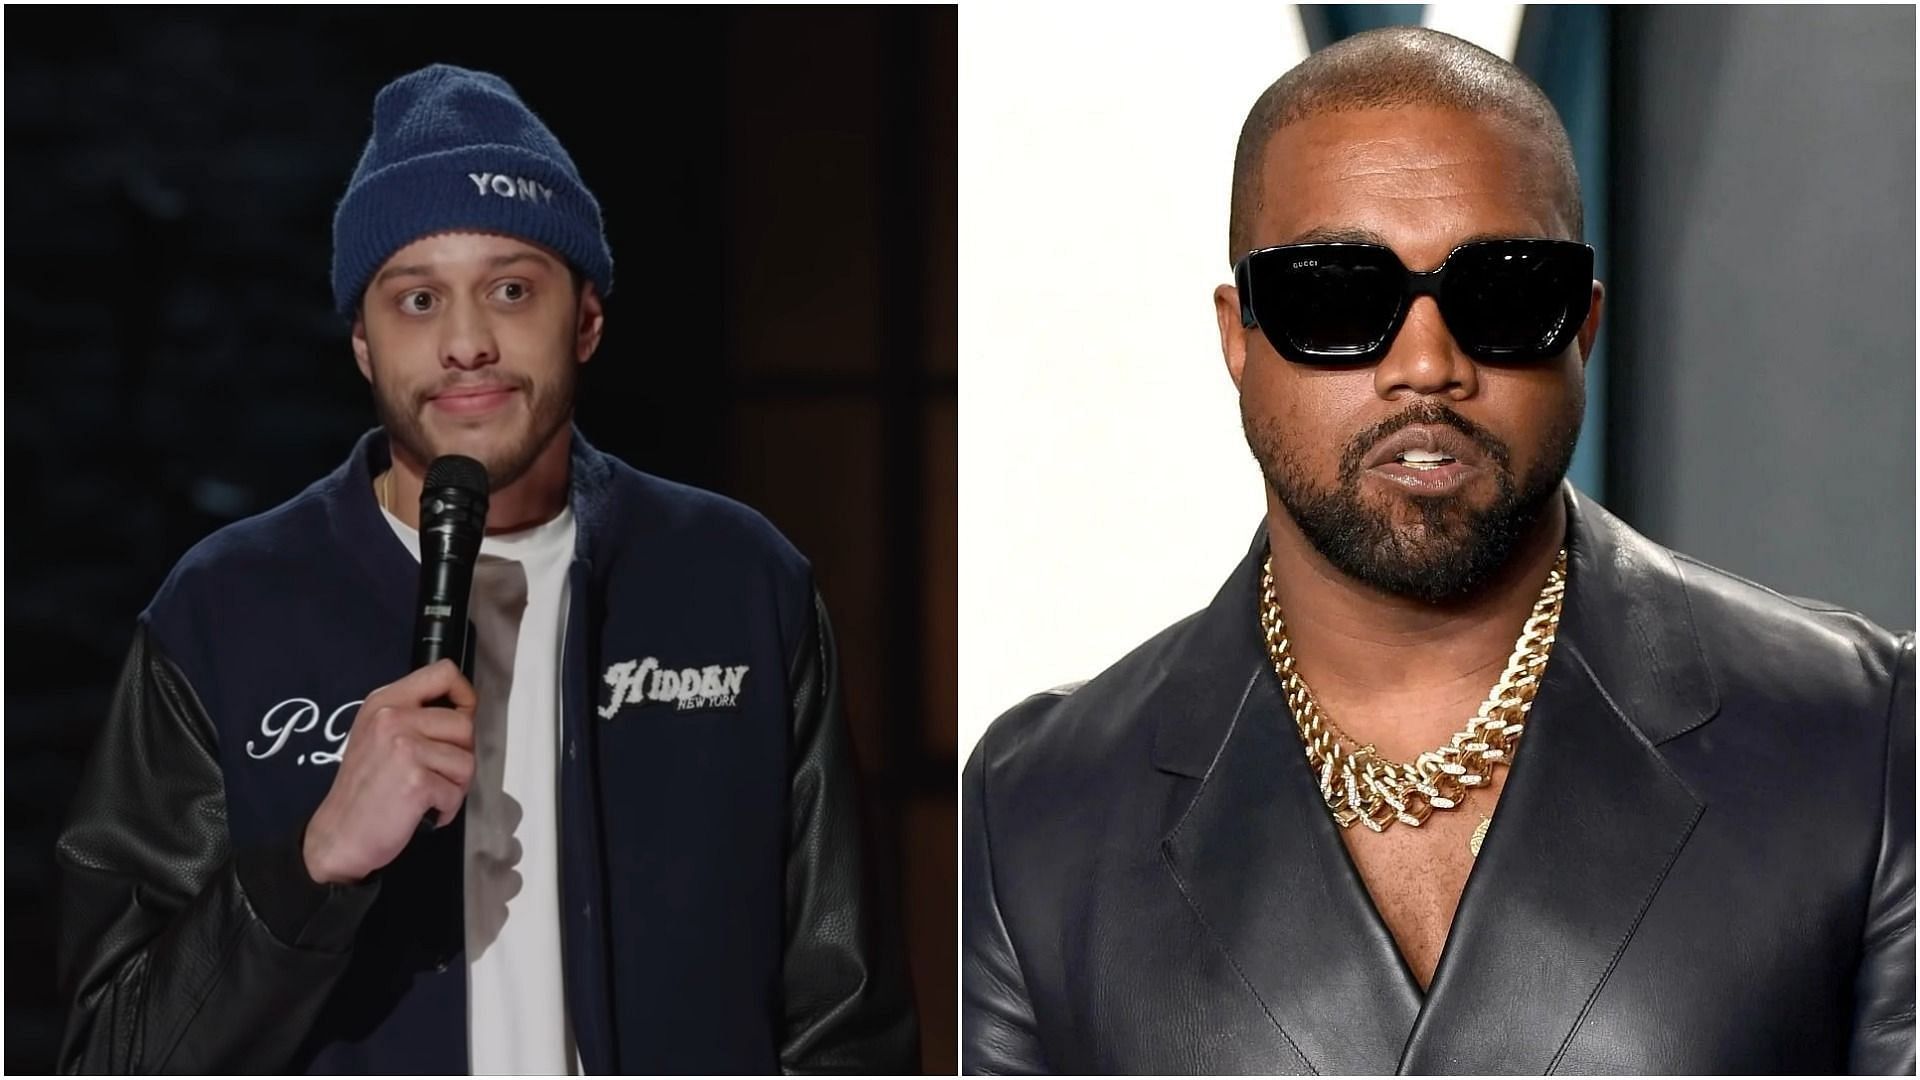 Pete Davidson and Kanye West (Image via Netflix is a Joke/ YouTube, and Karwai Tang/Getty Images)